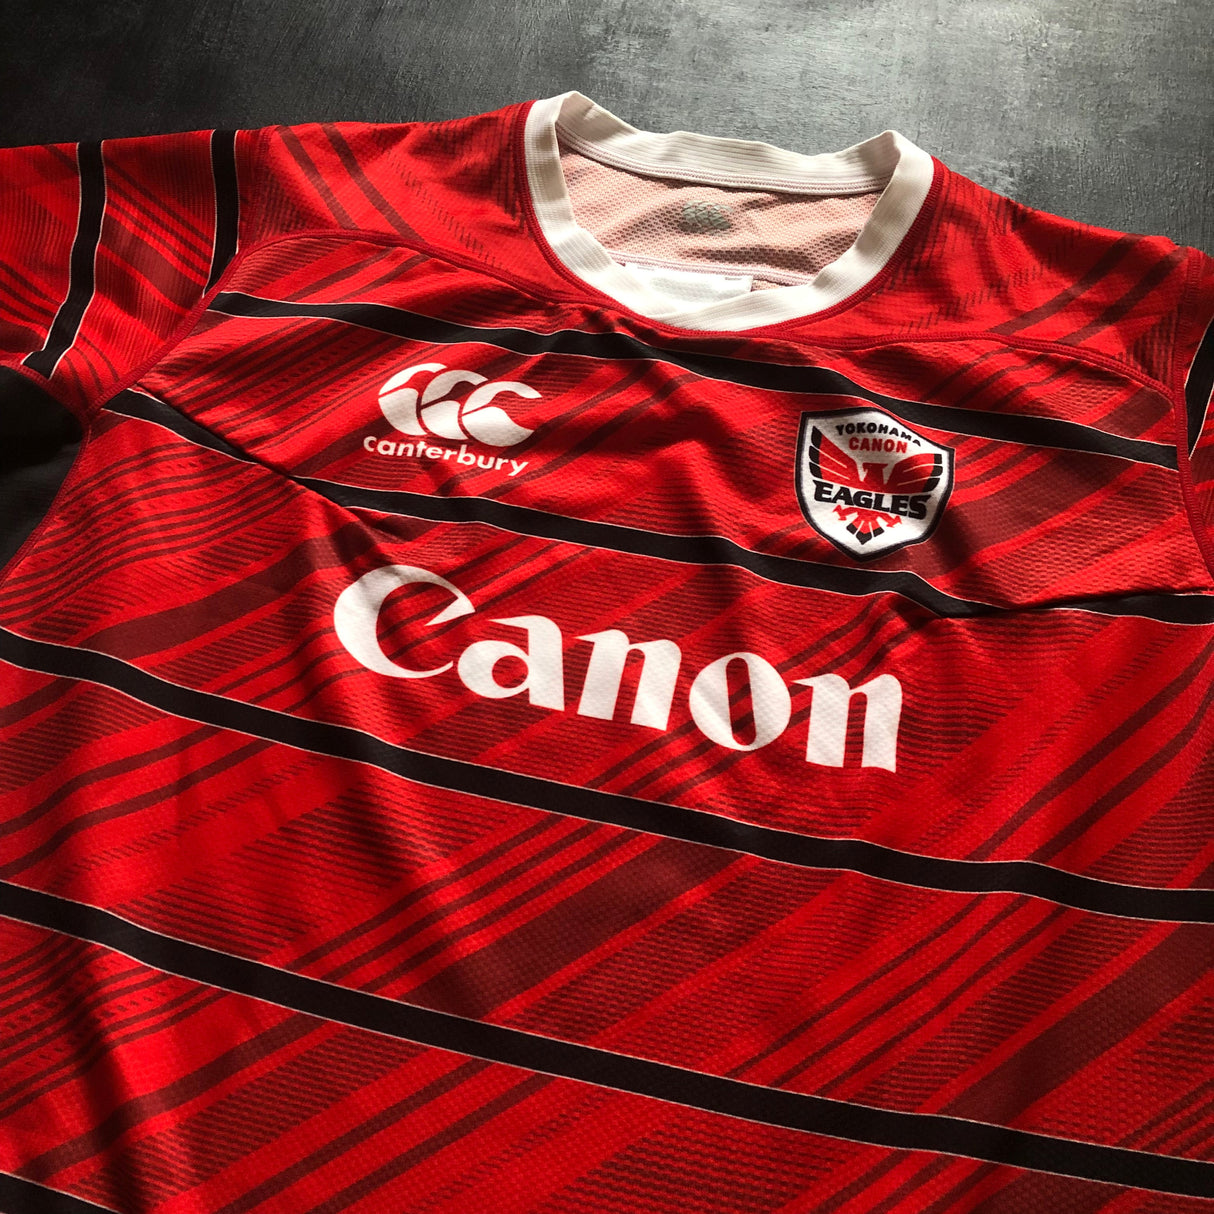 Canon Eagles Rugby Team Training Jersey (Japan Rugby League One) Player Worn 6L Underdog Rugby - The Tier 2 Rugby Shop 